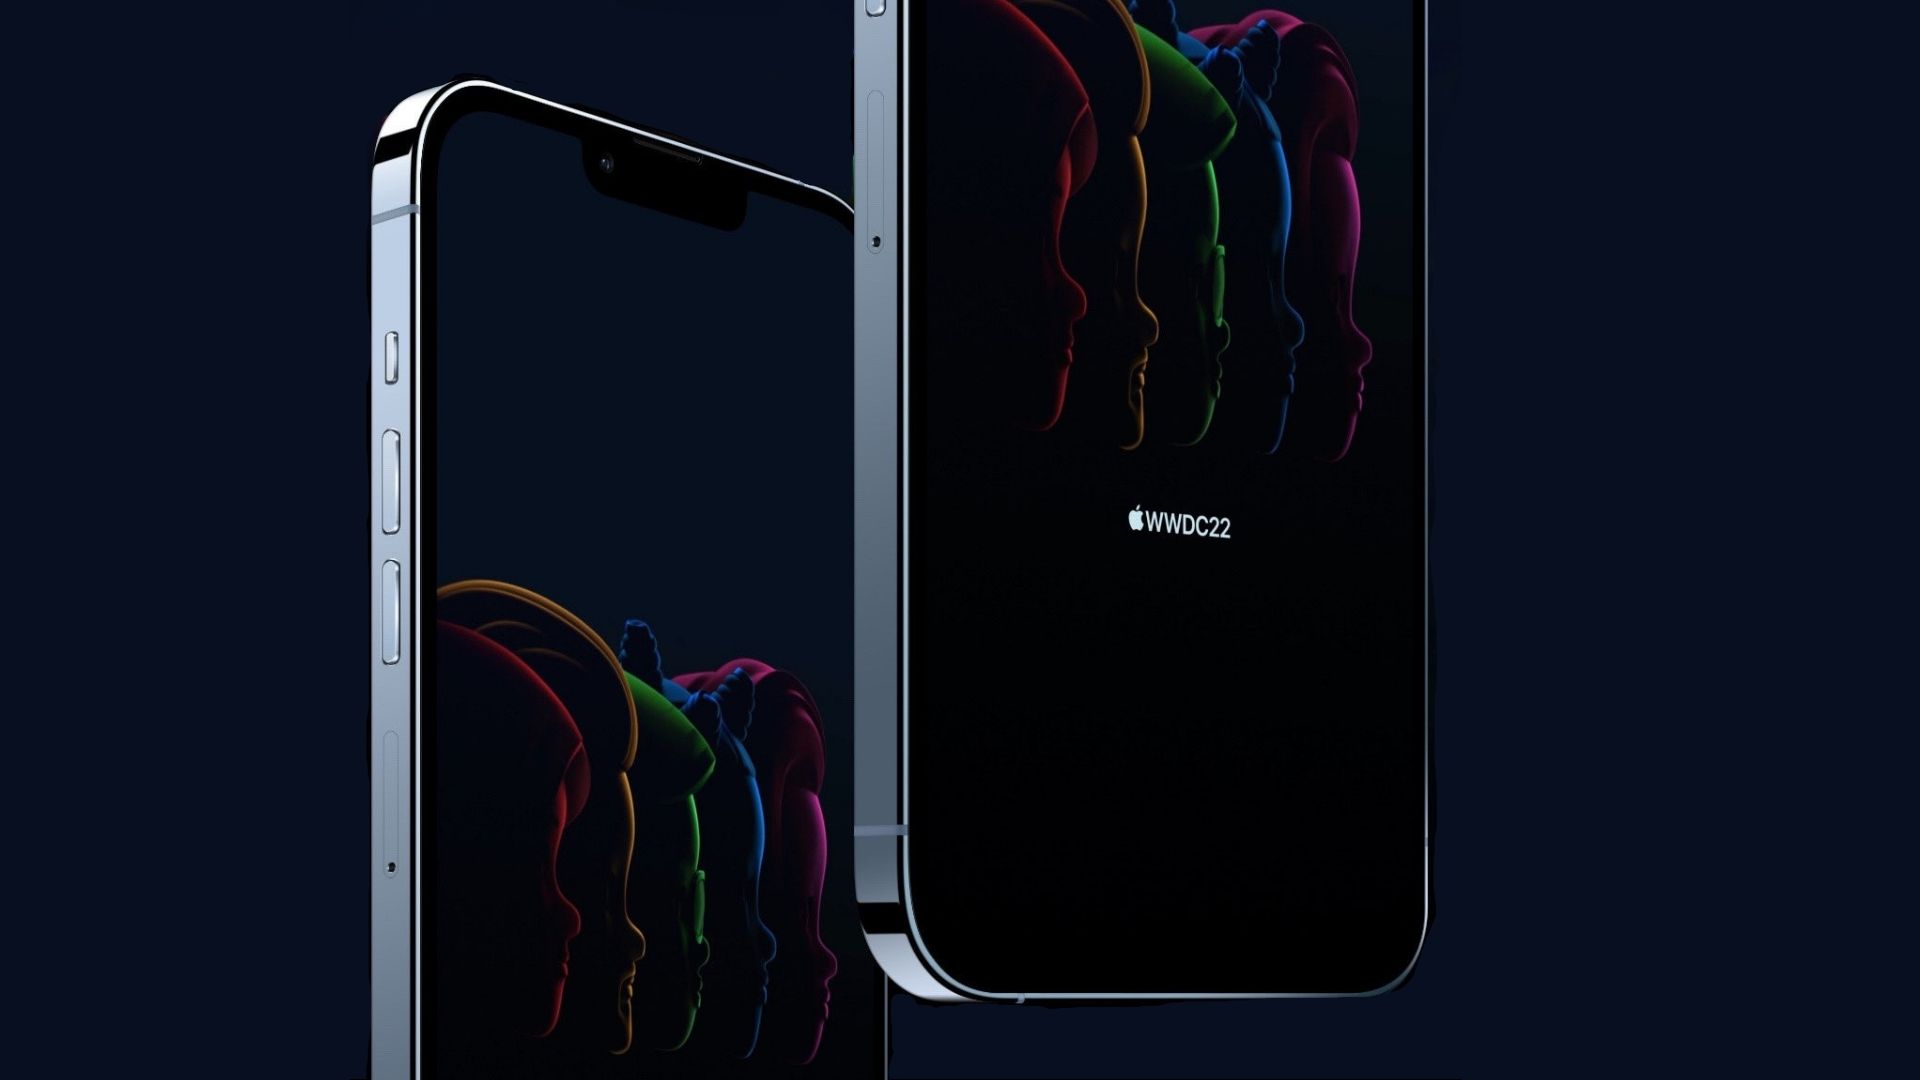 Download These New WWDC 2022 Wallpapers for iPhone